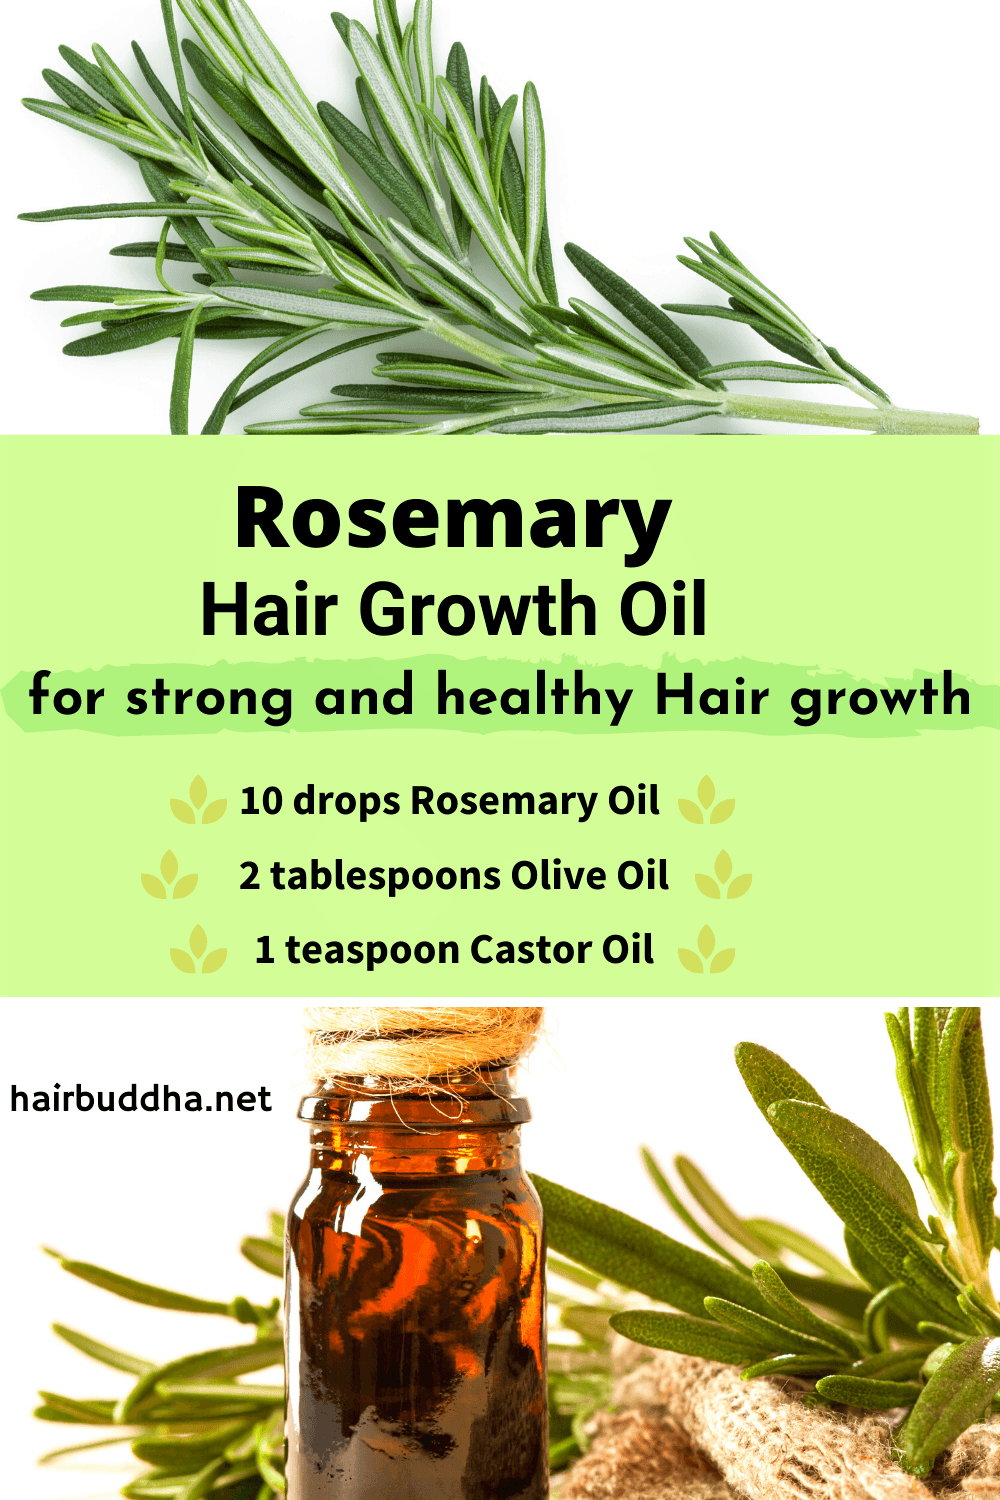 How to use rosemary oil for hair growth